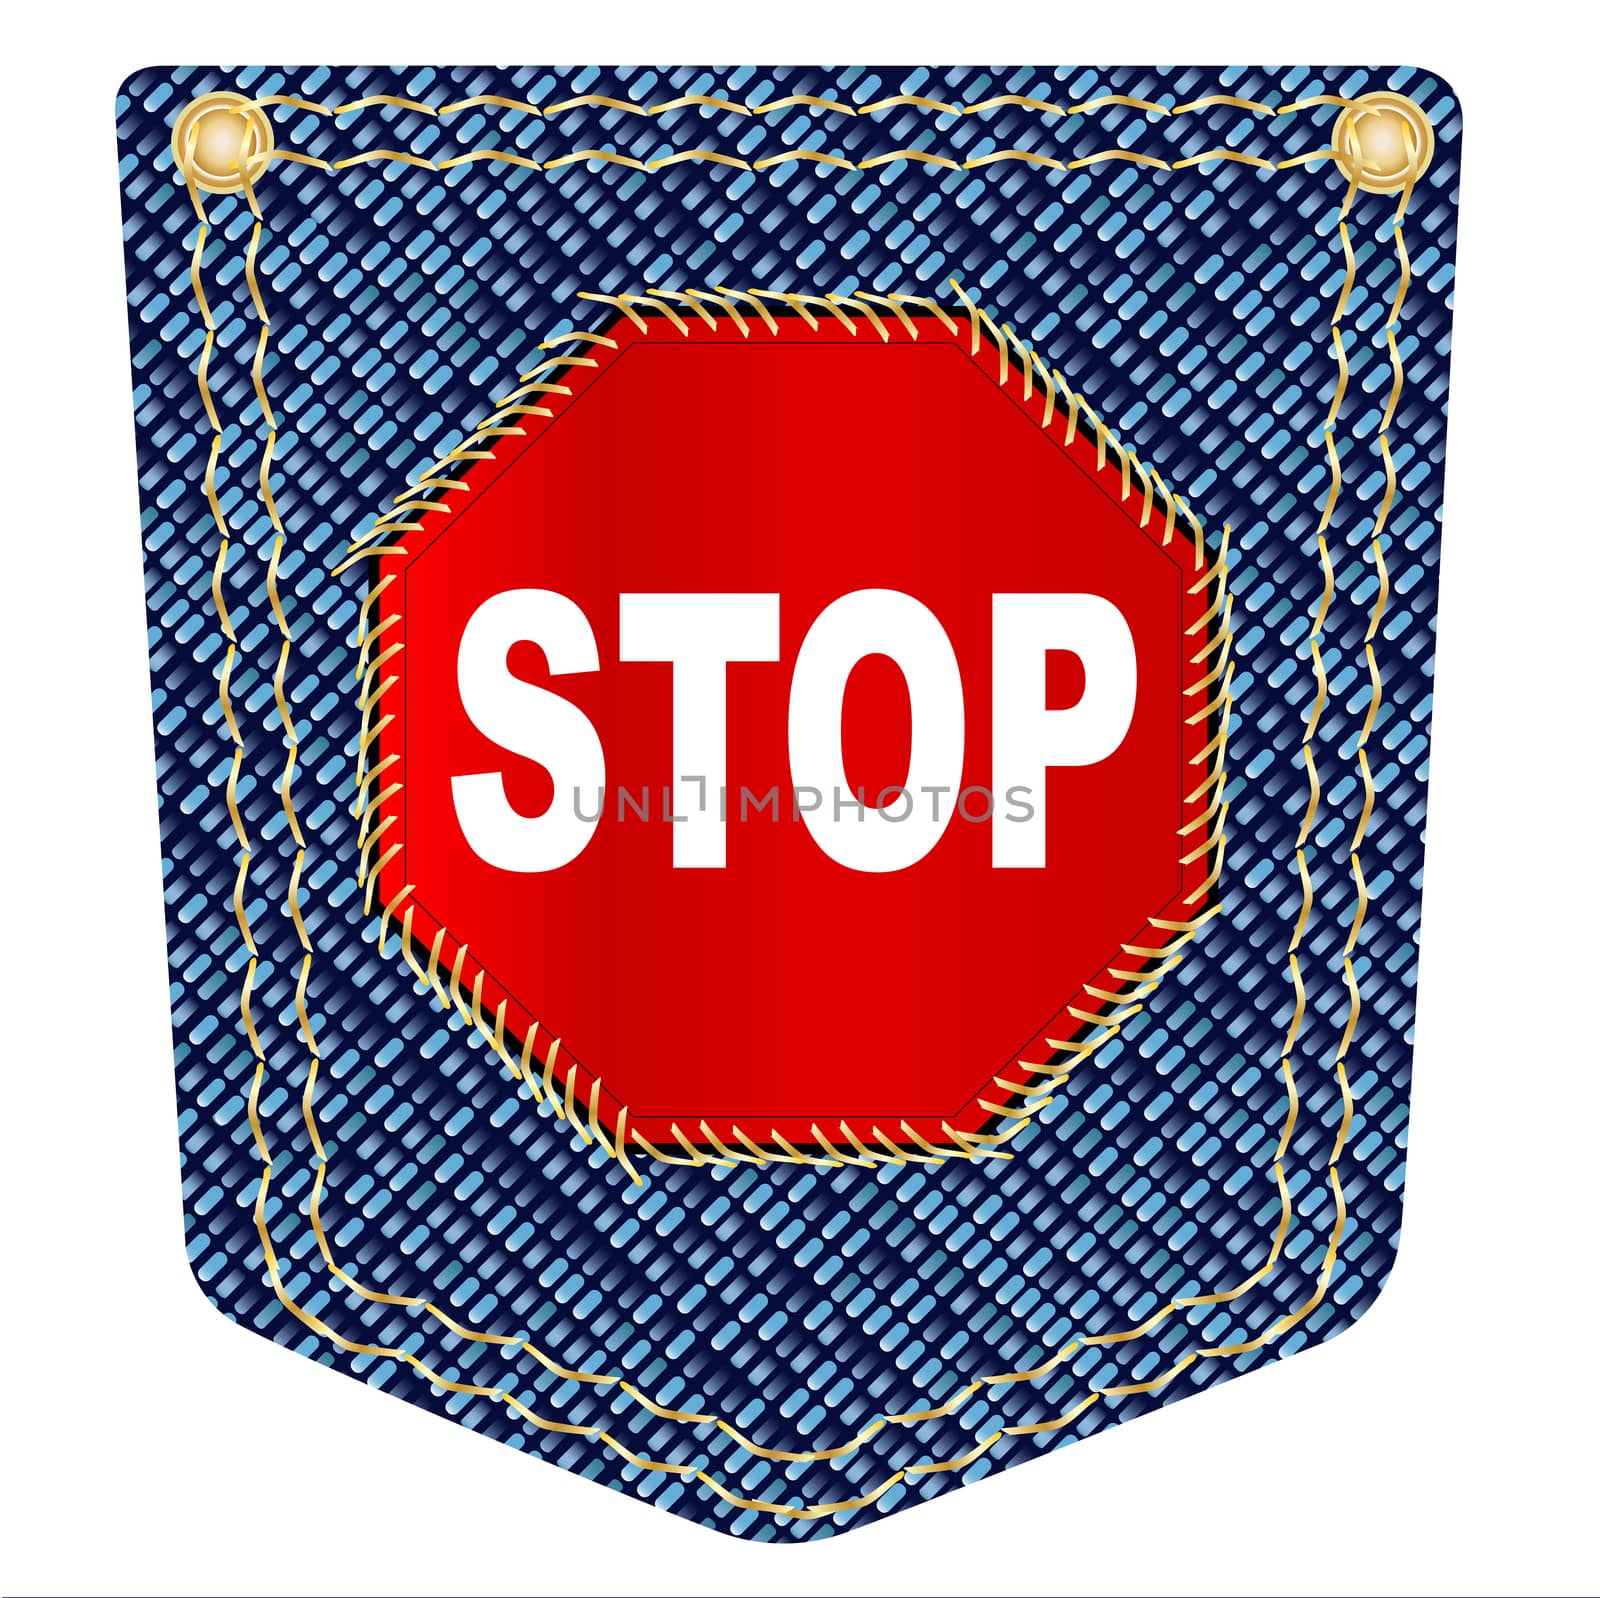 A plain blue denim pocket with copper studs and a stop sign icon over a white background